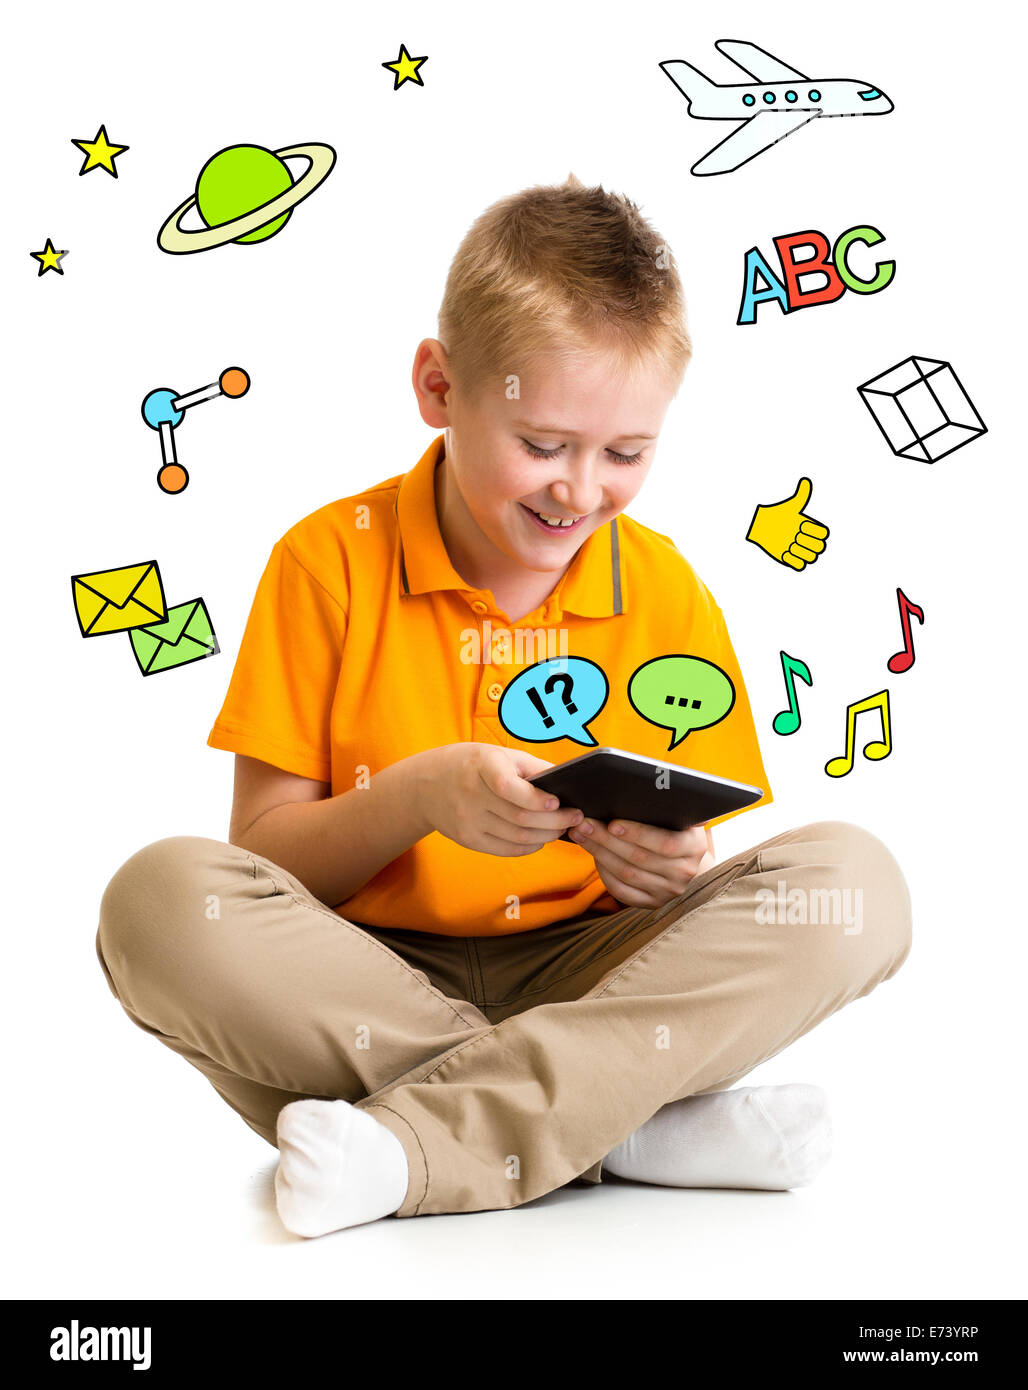 Kid boy sitting with tablet computer and learning or playing with great interest Stock Photo